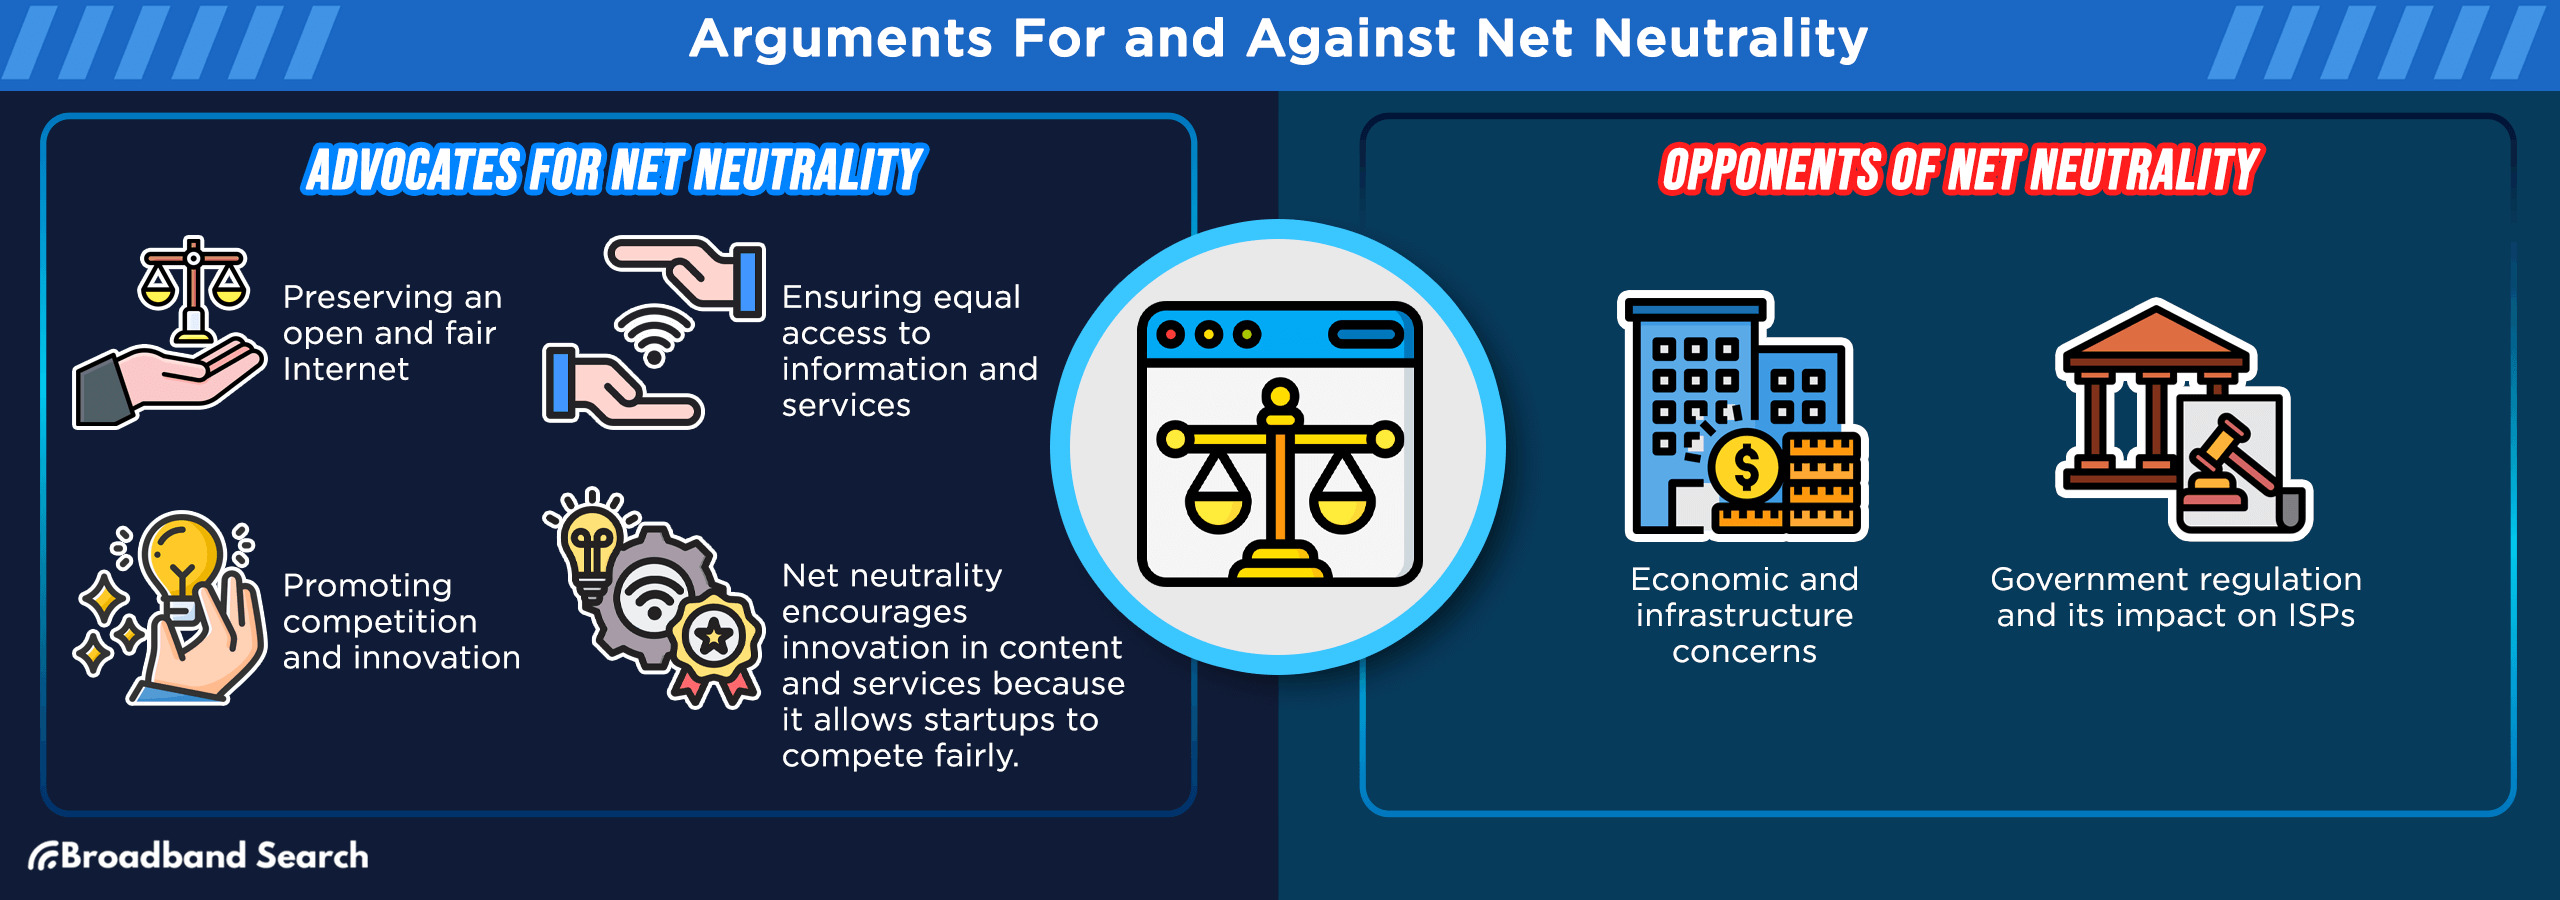 Arguments for and against net neutrality